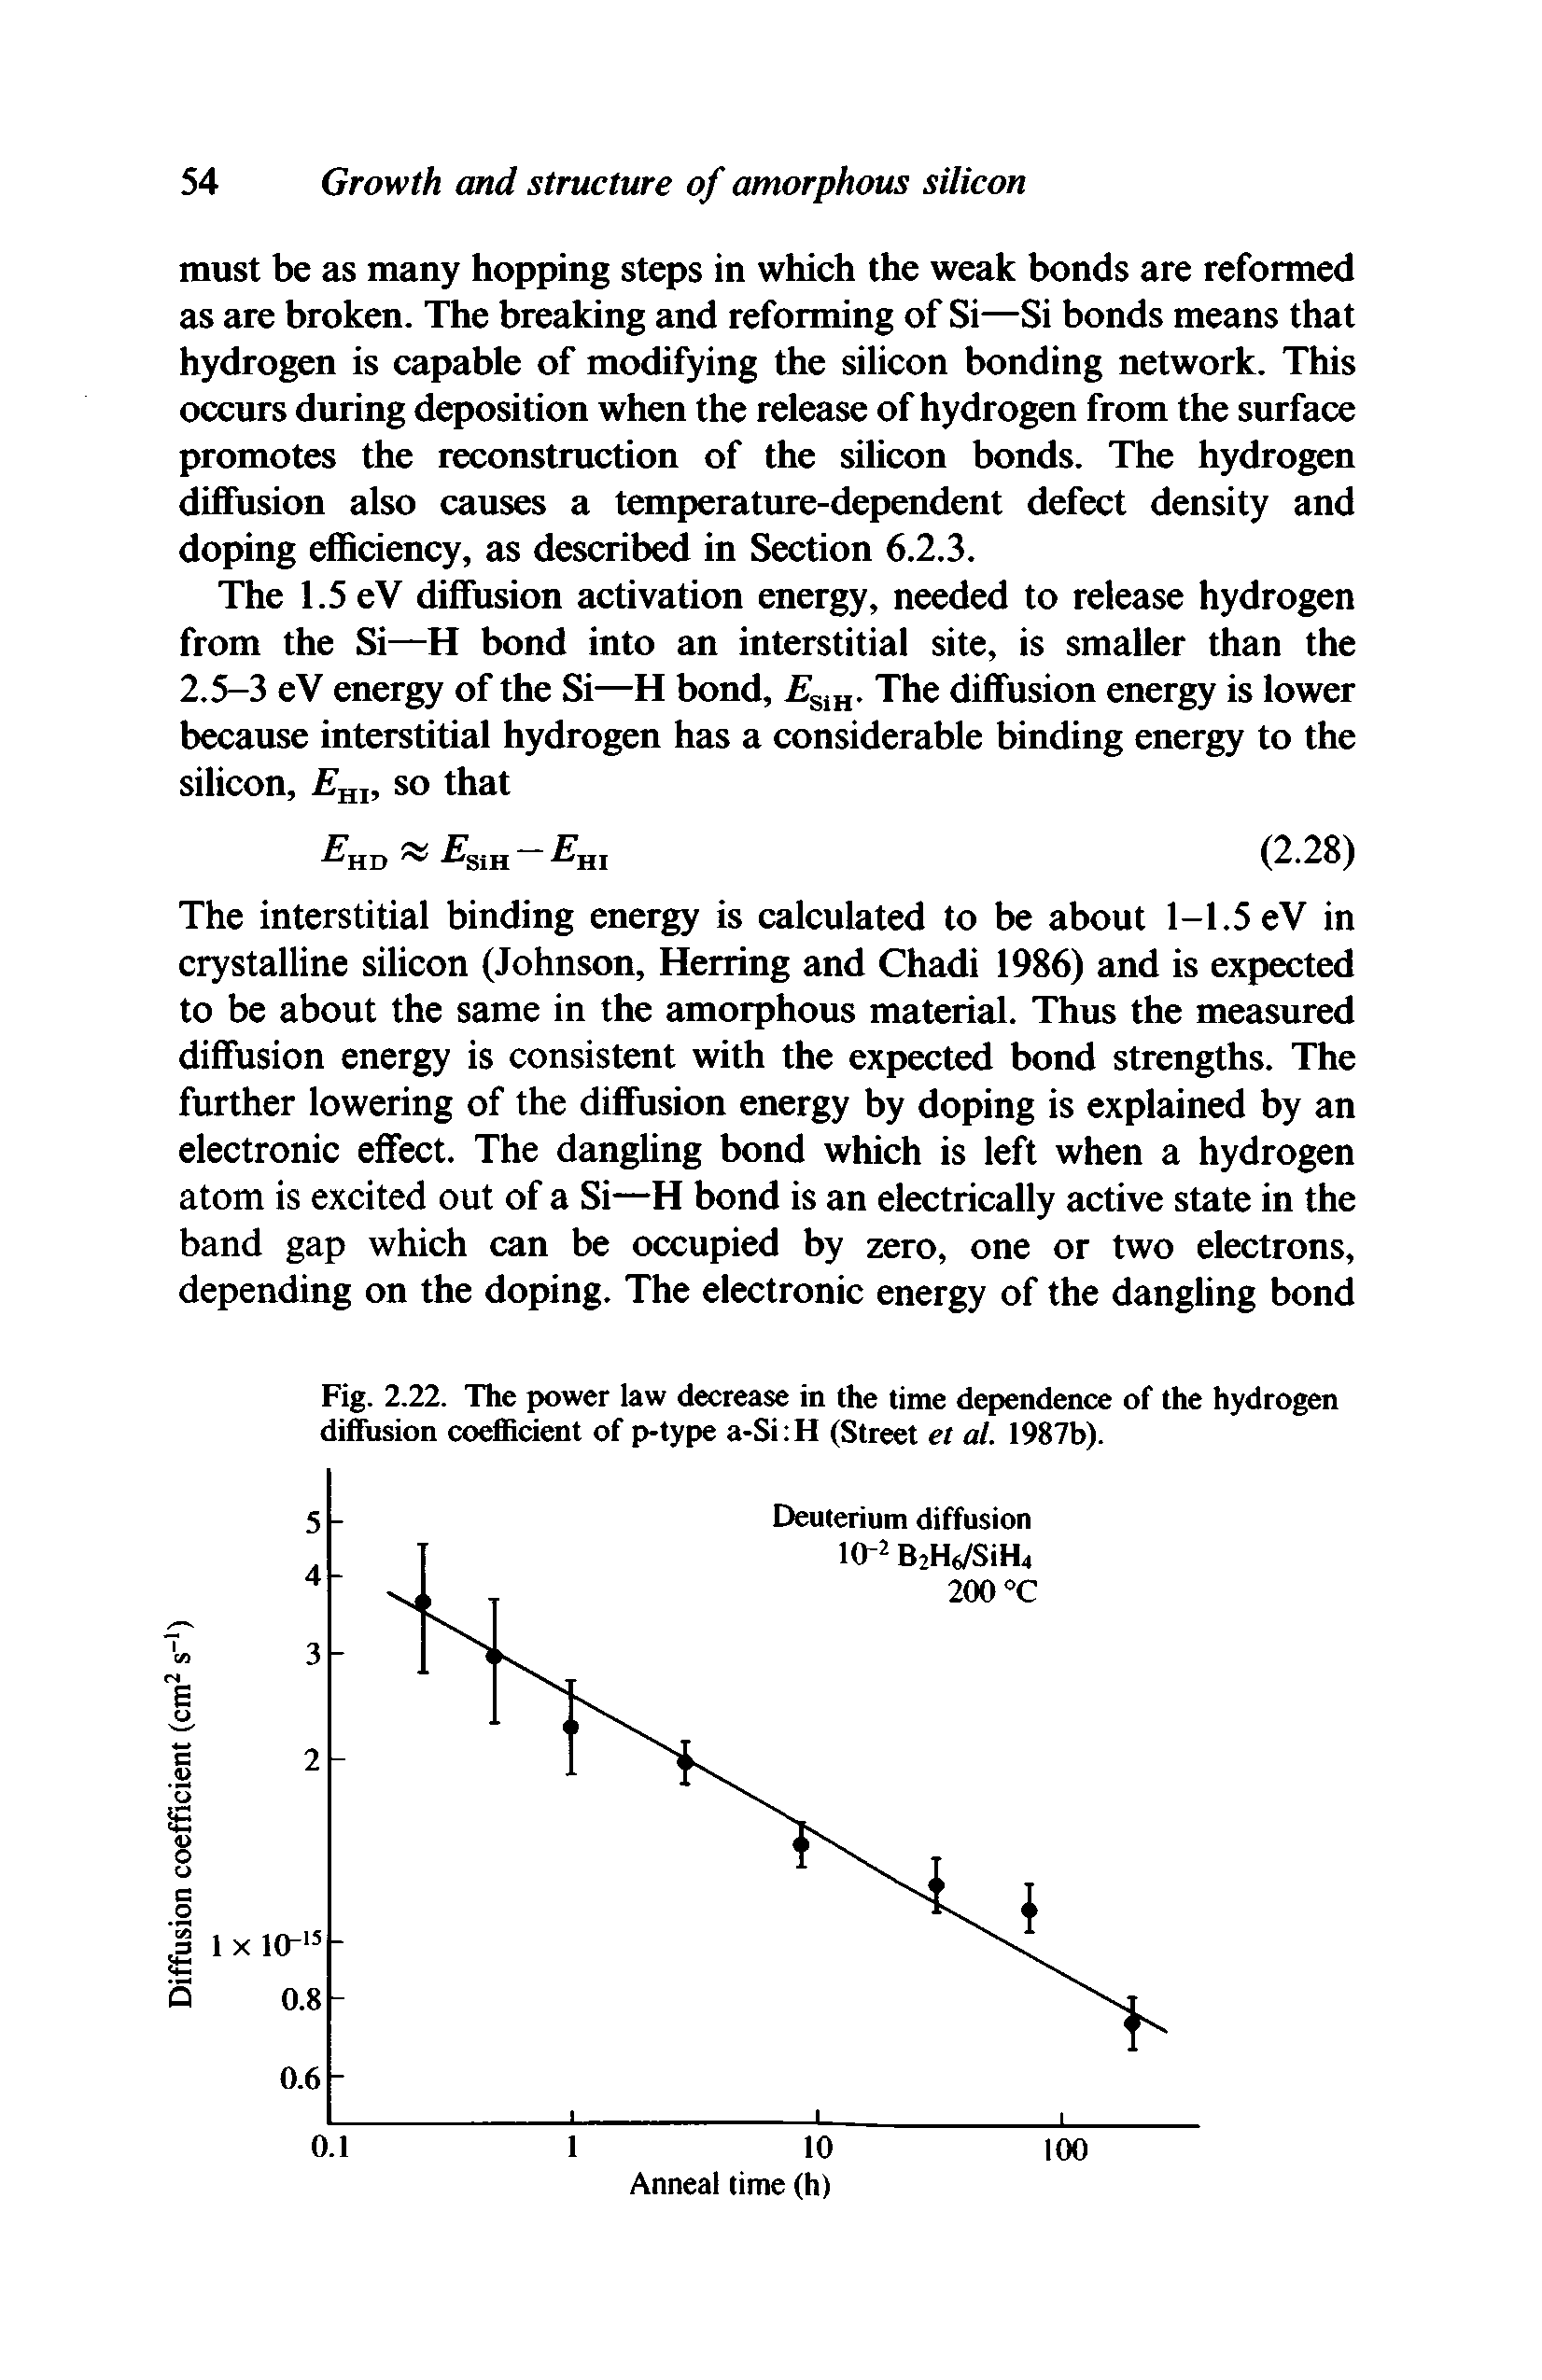 Fig. 2.22. The power law decrease in the time dependence of the hydrogen diffusion coefficient of p-type a-Si H (Street et at. 1987b).